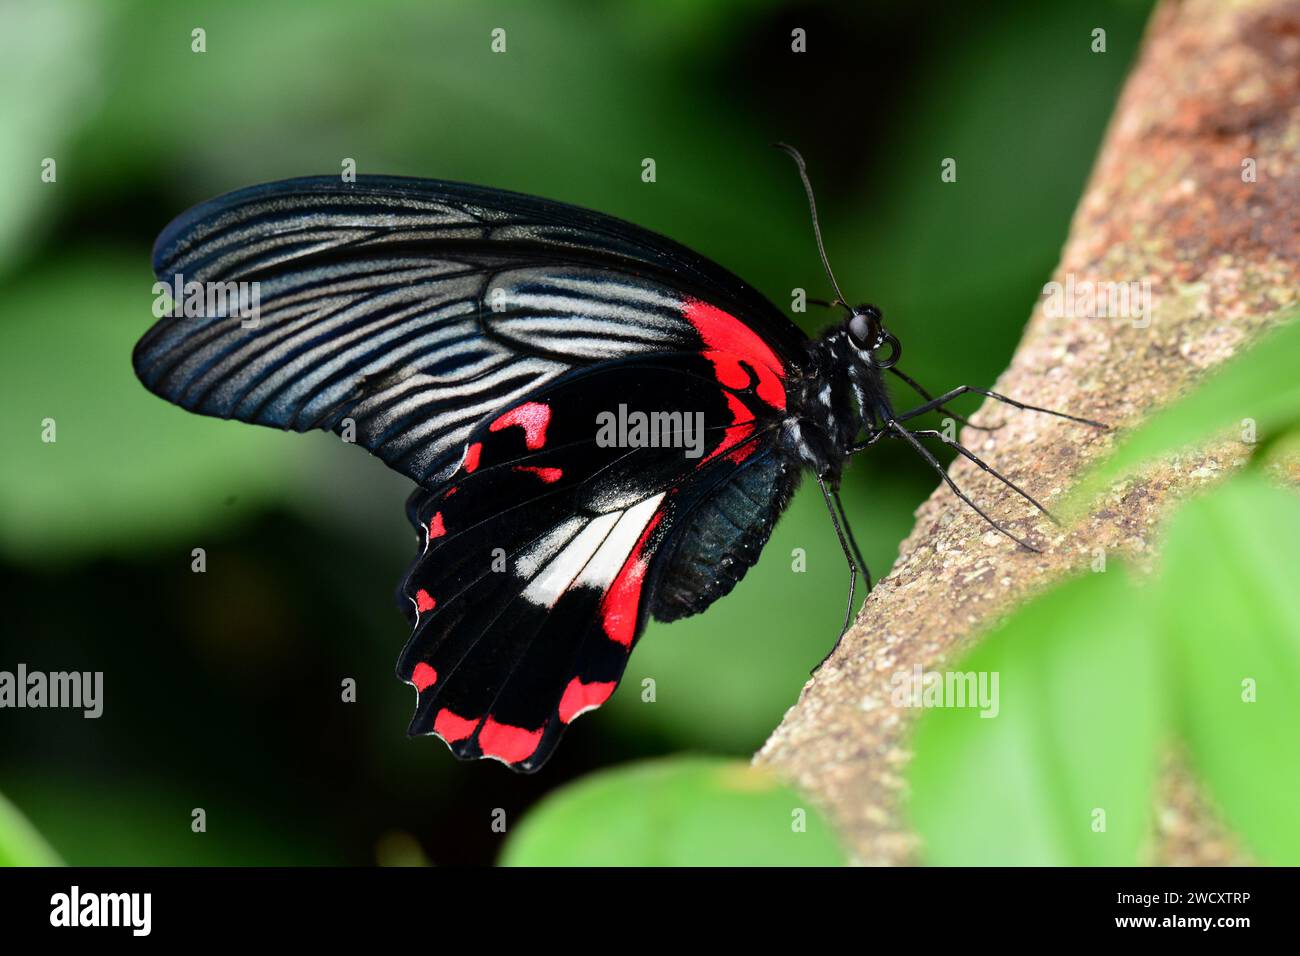 Scarlet Mormon butterfly lands in the butterfly gardens. Stock Photo